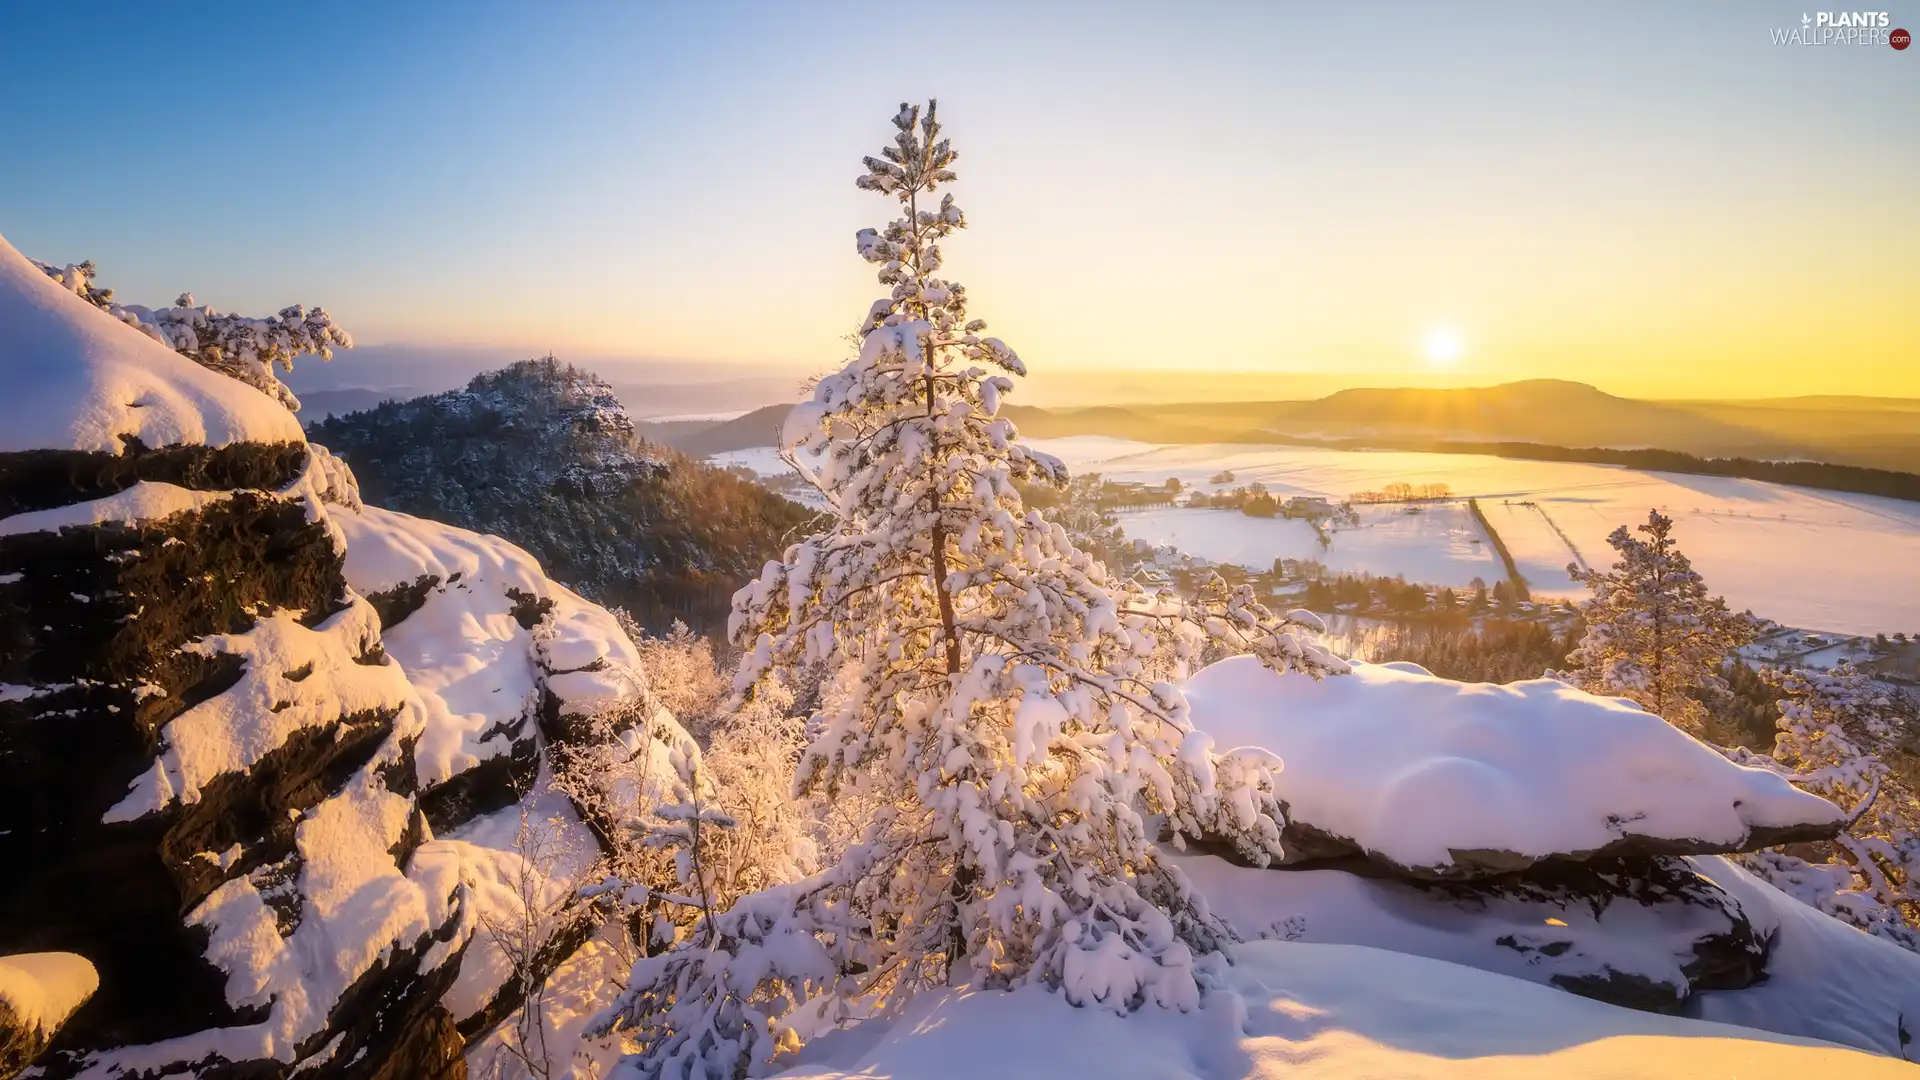 rays of the Sun, snow, viewes, Mountains, winter, trees, rocks